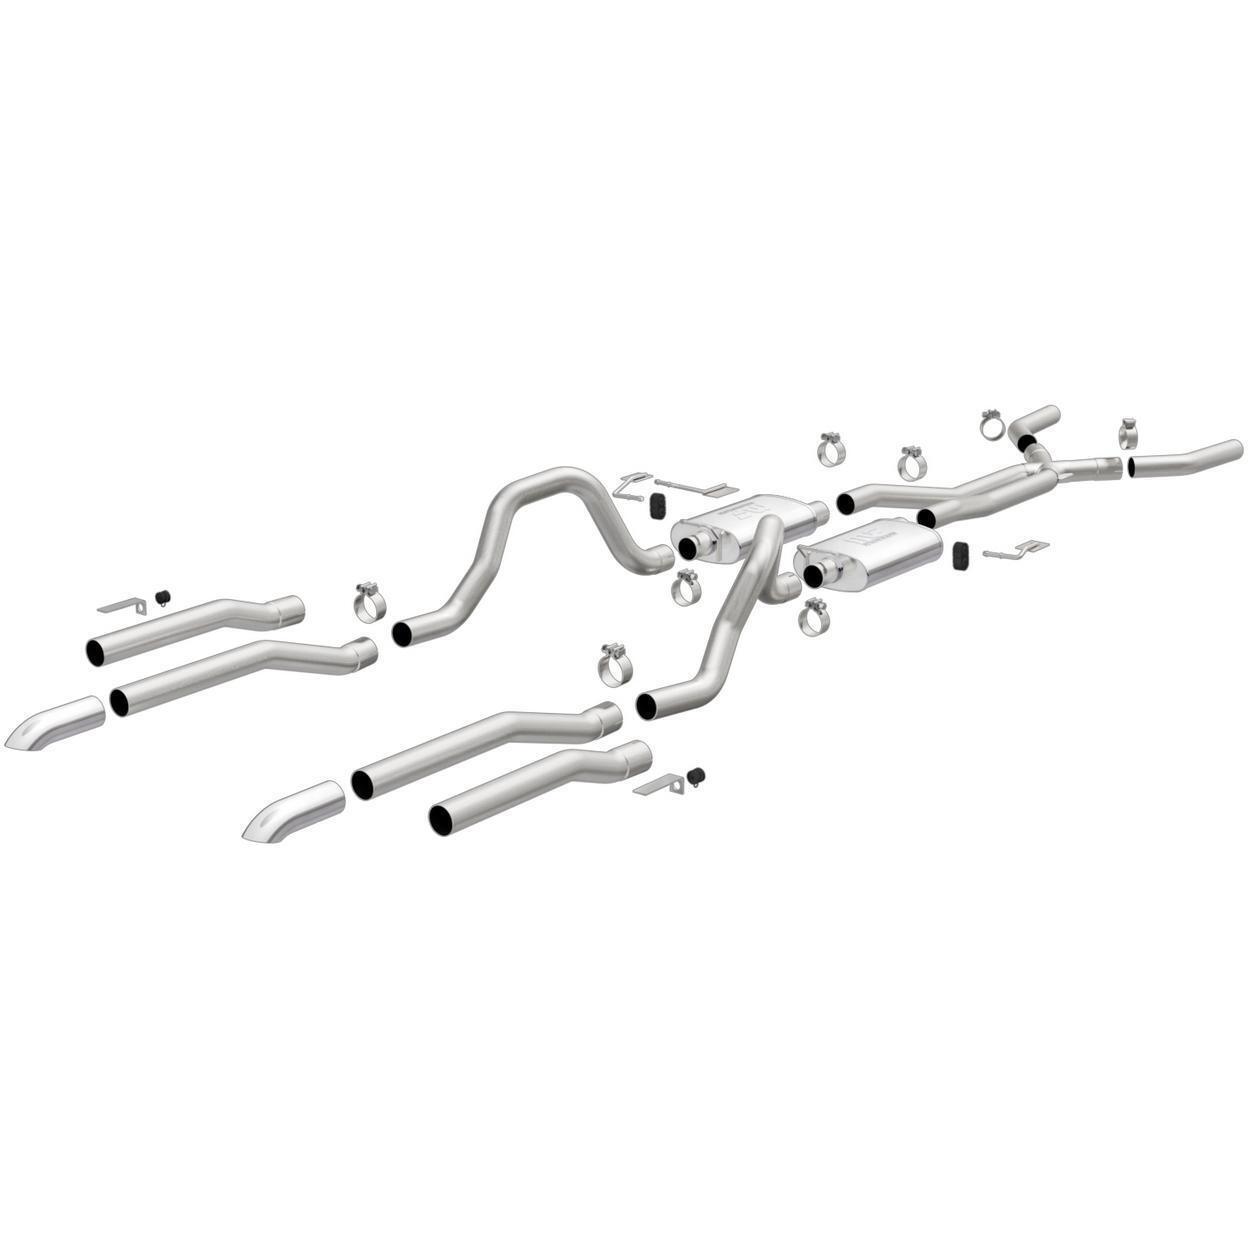 Exhaust System Kit for 1973-1976 Dodge Coronet